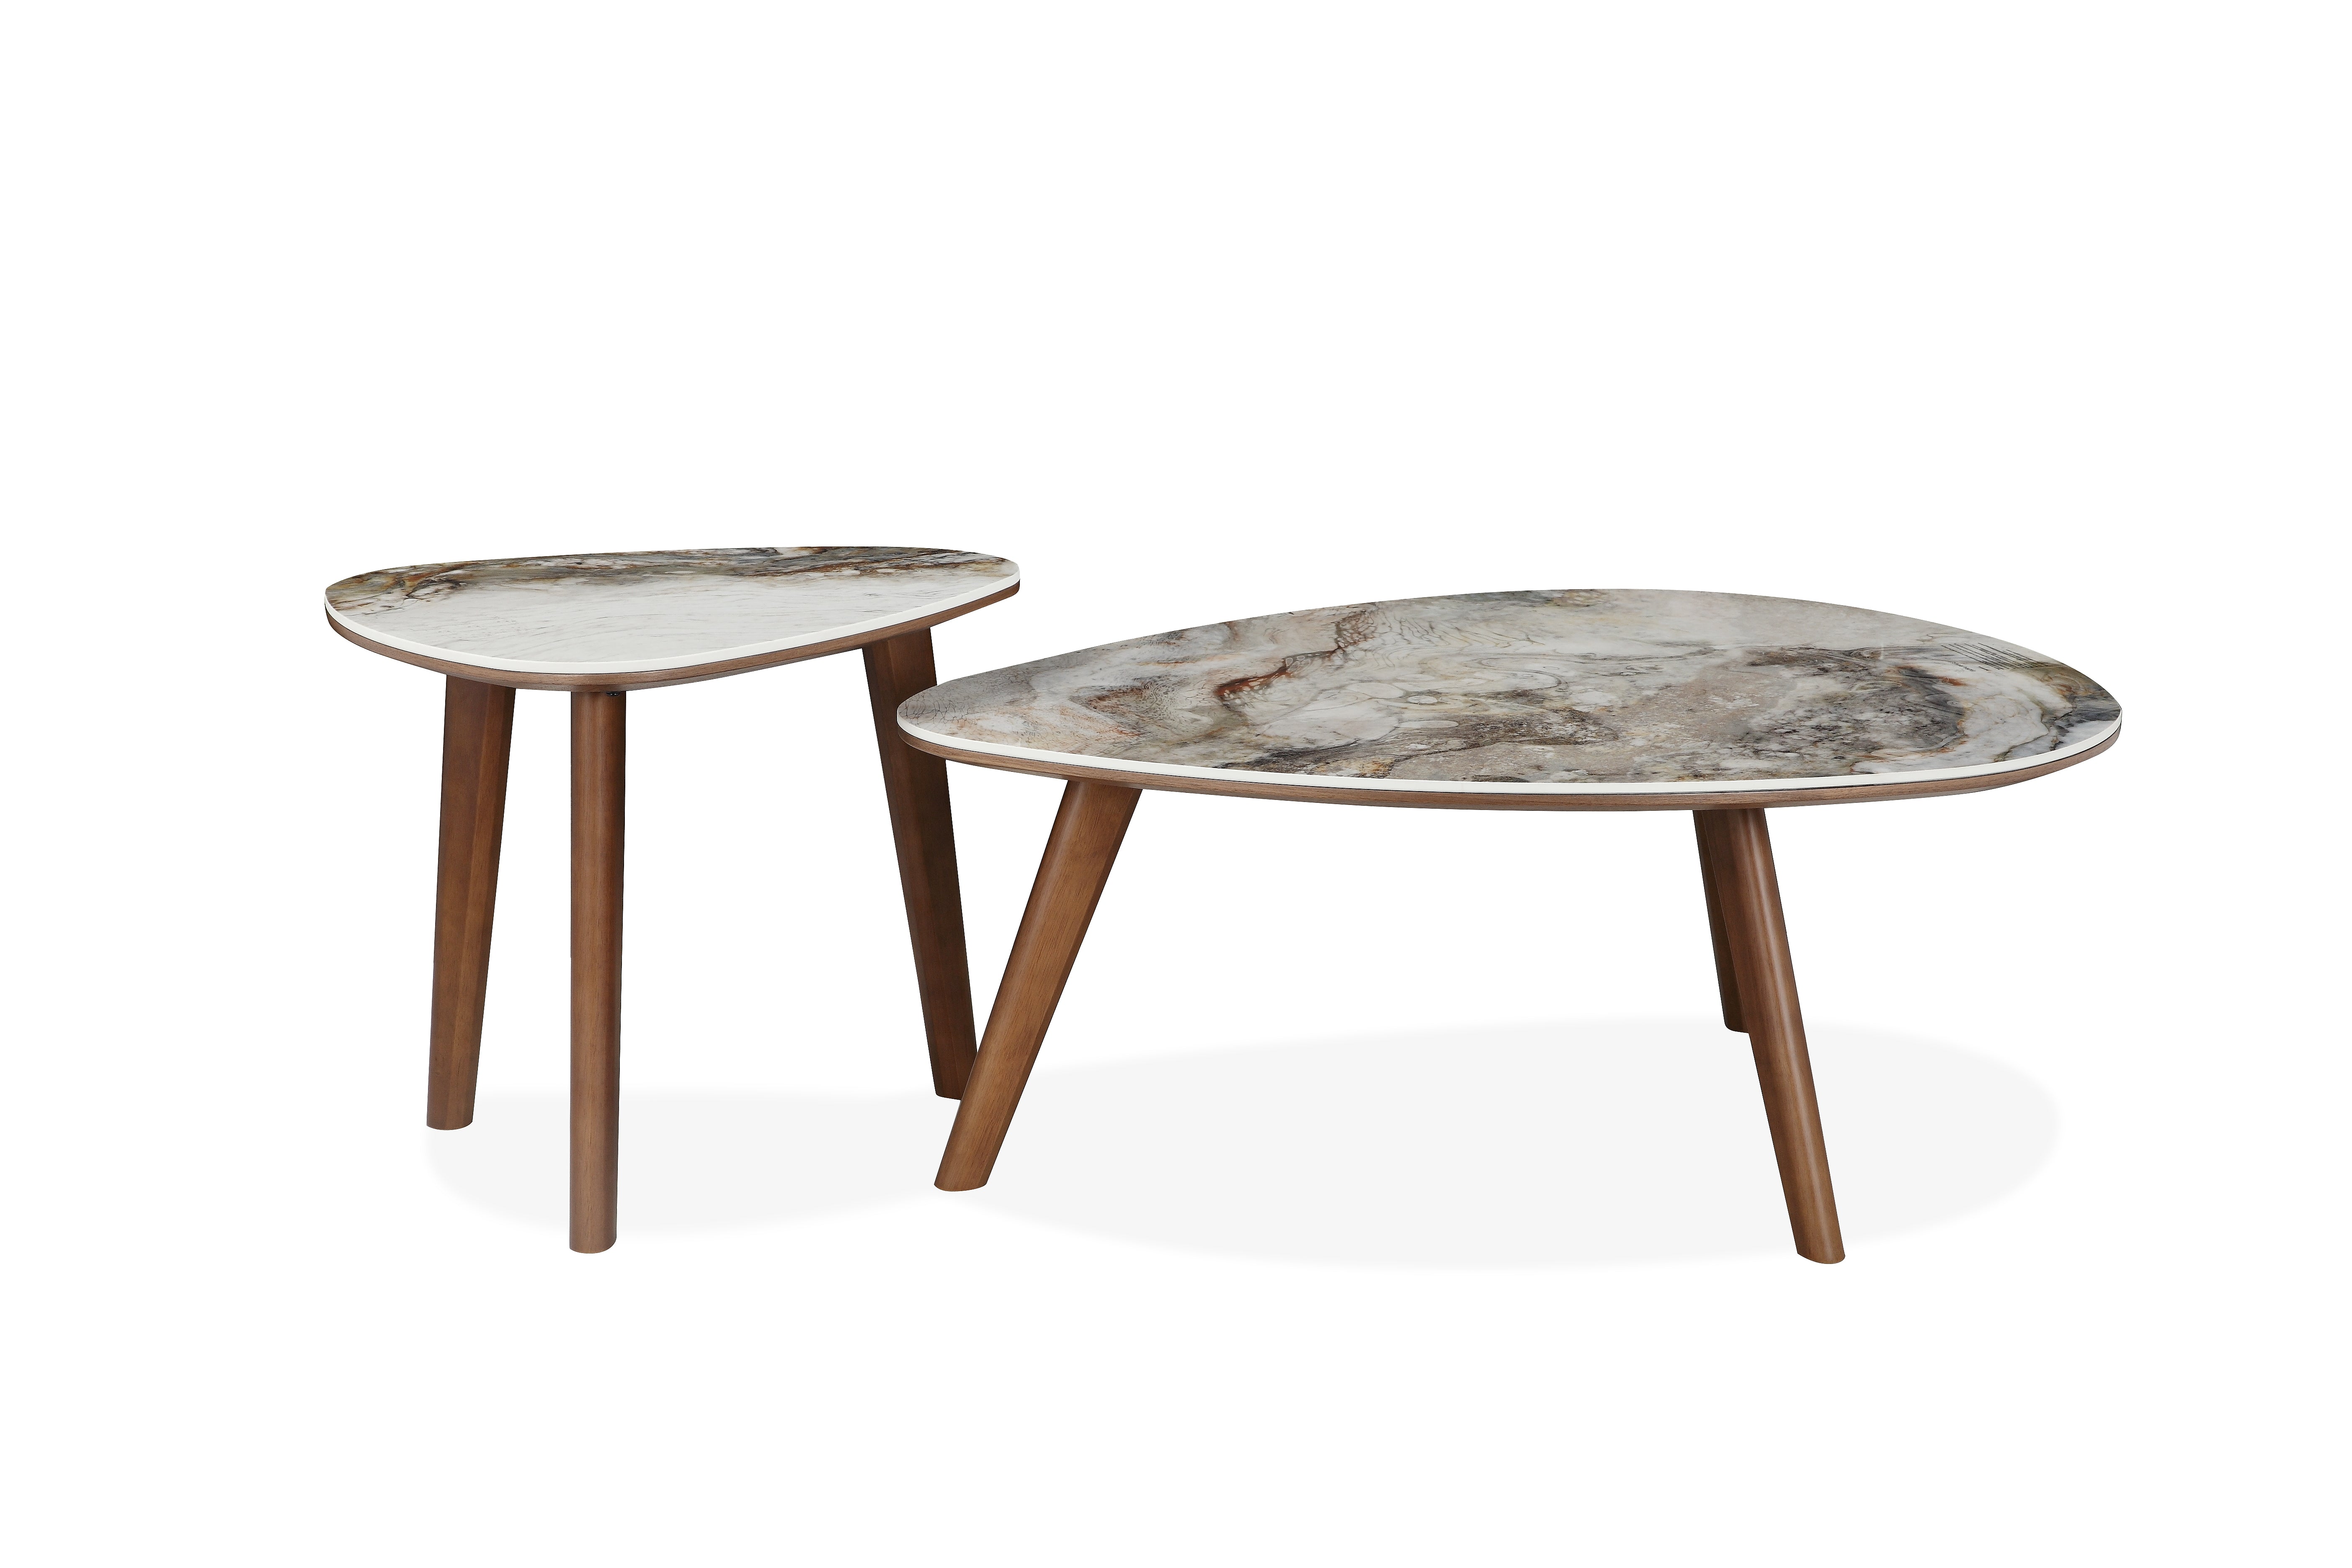 Elora: Luxury Anise Ceramic Dining Setting with Occasional Pieces